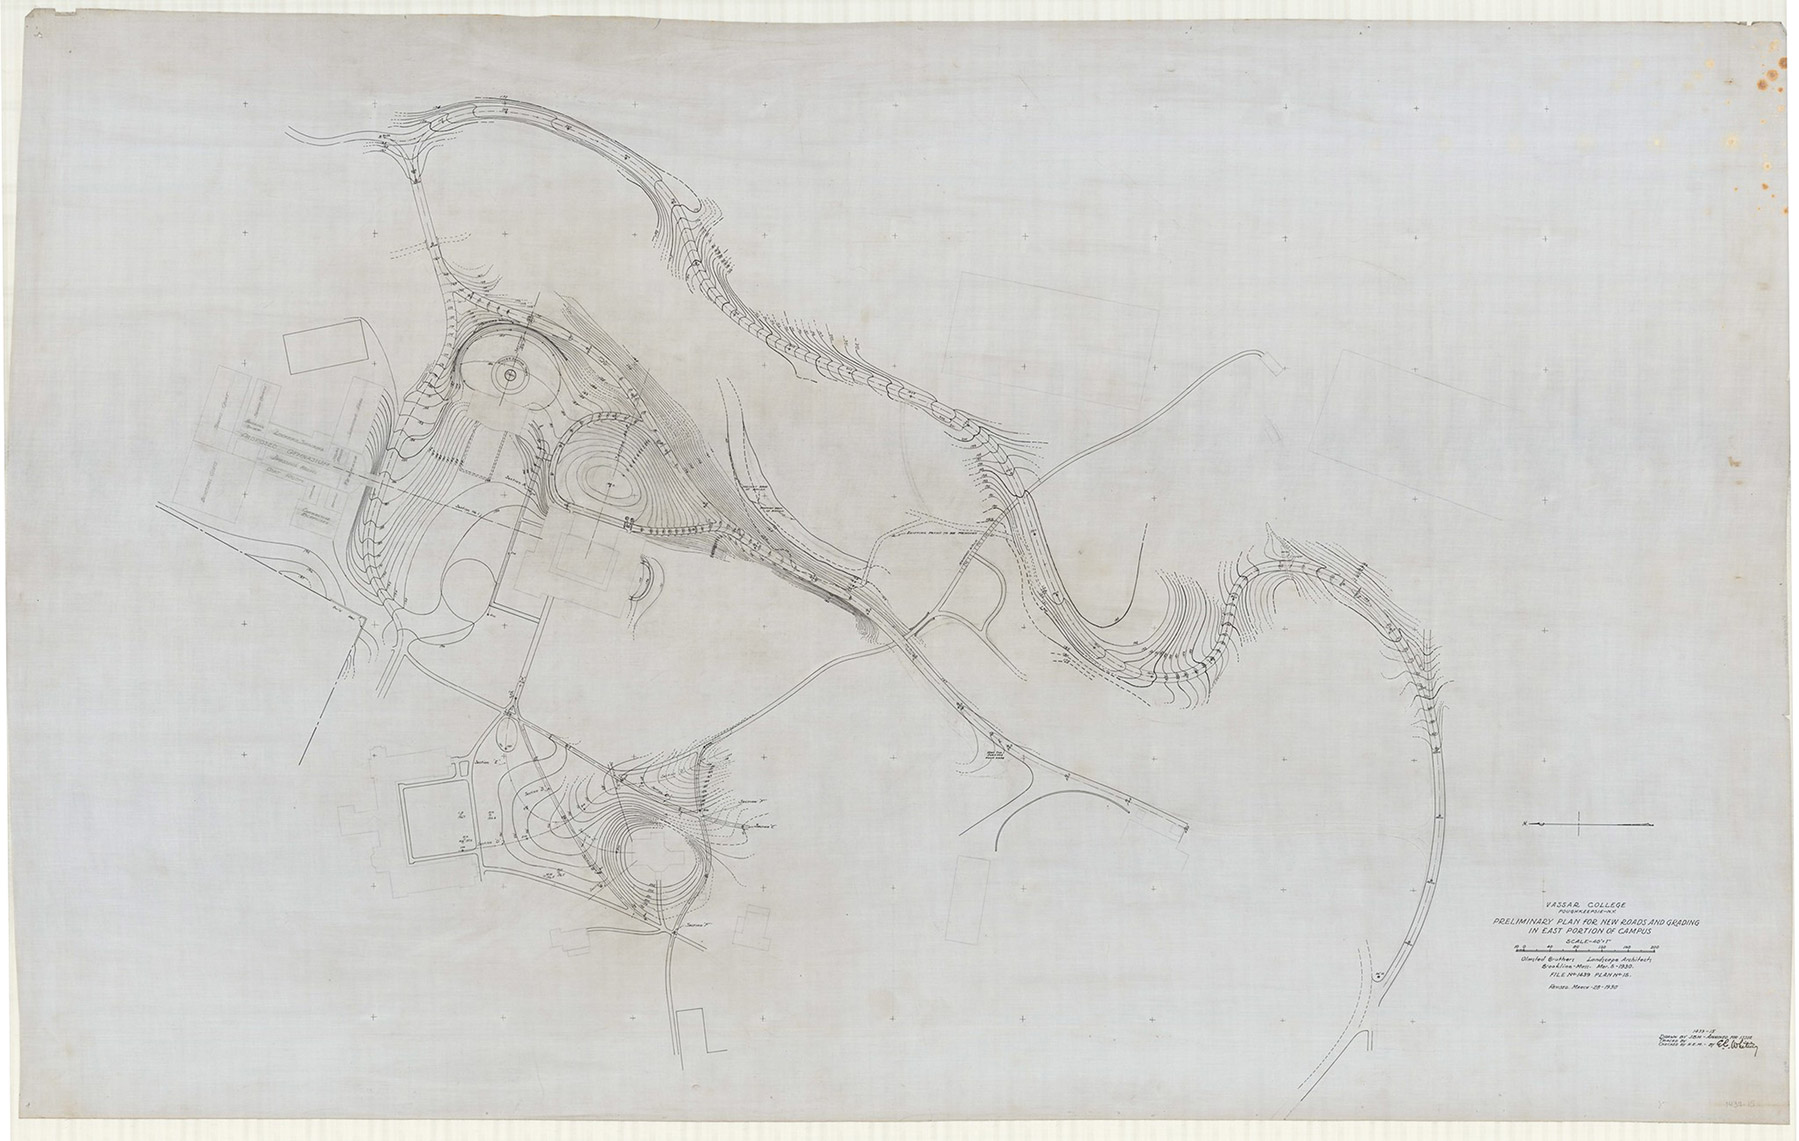 Olmsted Brothers, Preliminary plan for new roads and grading in east portion of campus, around Blodgett Hall, March 28, 1930. (United States Department of the Interior, National Park Service, Frederick Law Olmsted National Historic Site, 1439-15).